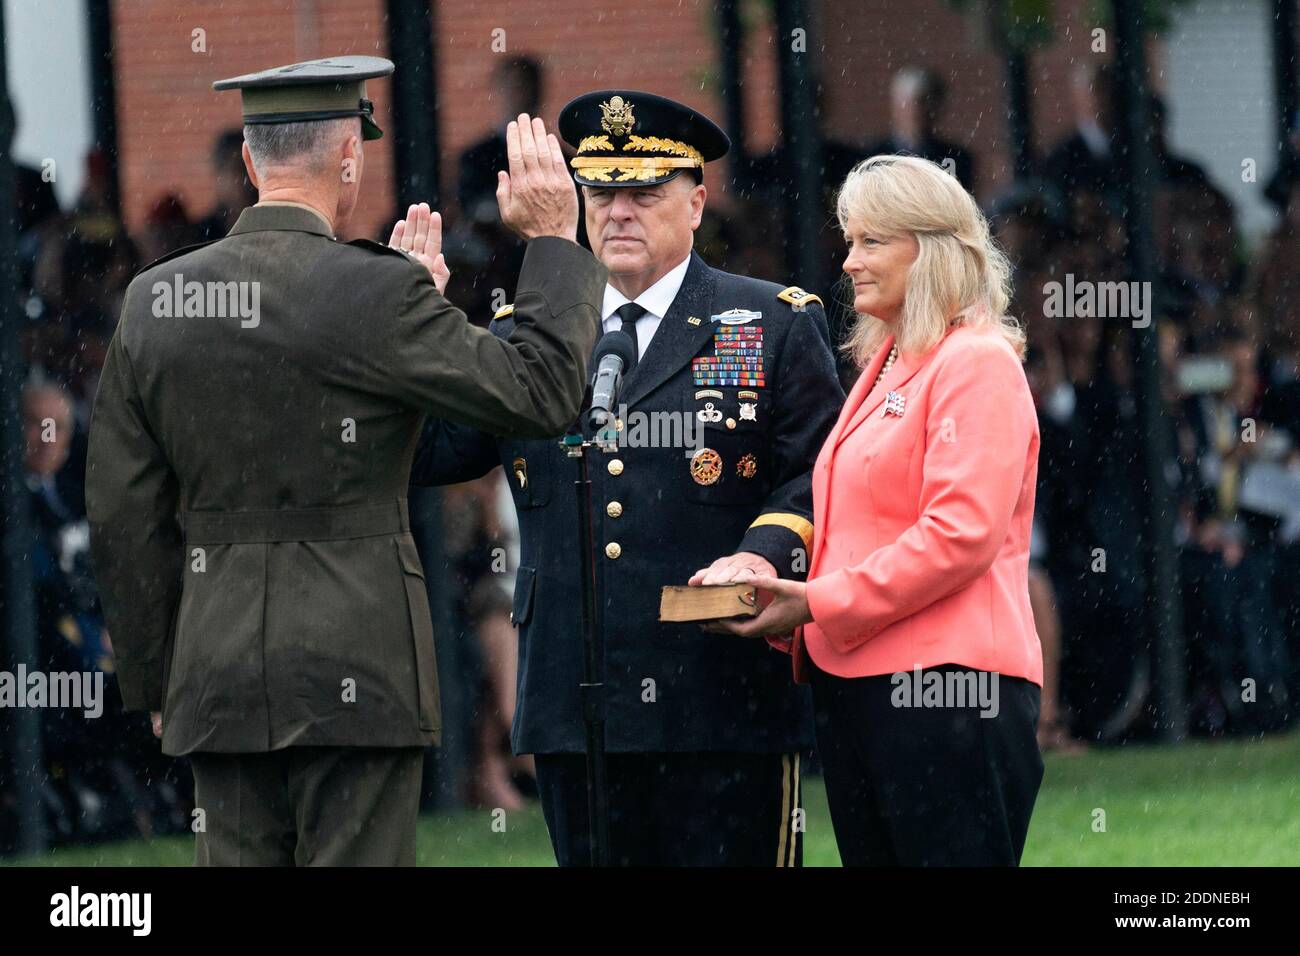 Chairman of the Joint Chiefs of Staff Mark Milley is sworn in by outgoing chairman General Joseph Dunford during the Armed Forces Welcome Ceremony in honor Milley being appointed as the Twentieth Chairman of the Joint Chiefs of Staff at Joint Base Myer in Virginia, September 30, 2019. At right is Hollyanne Milley, Spouse of General Milley.Credit: Chris Kleponis / Pool via CNP /ABACAPRESS.COM Stock Photo